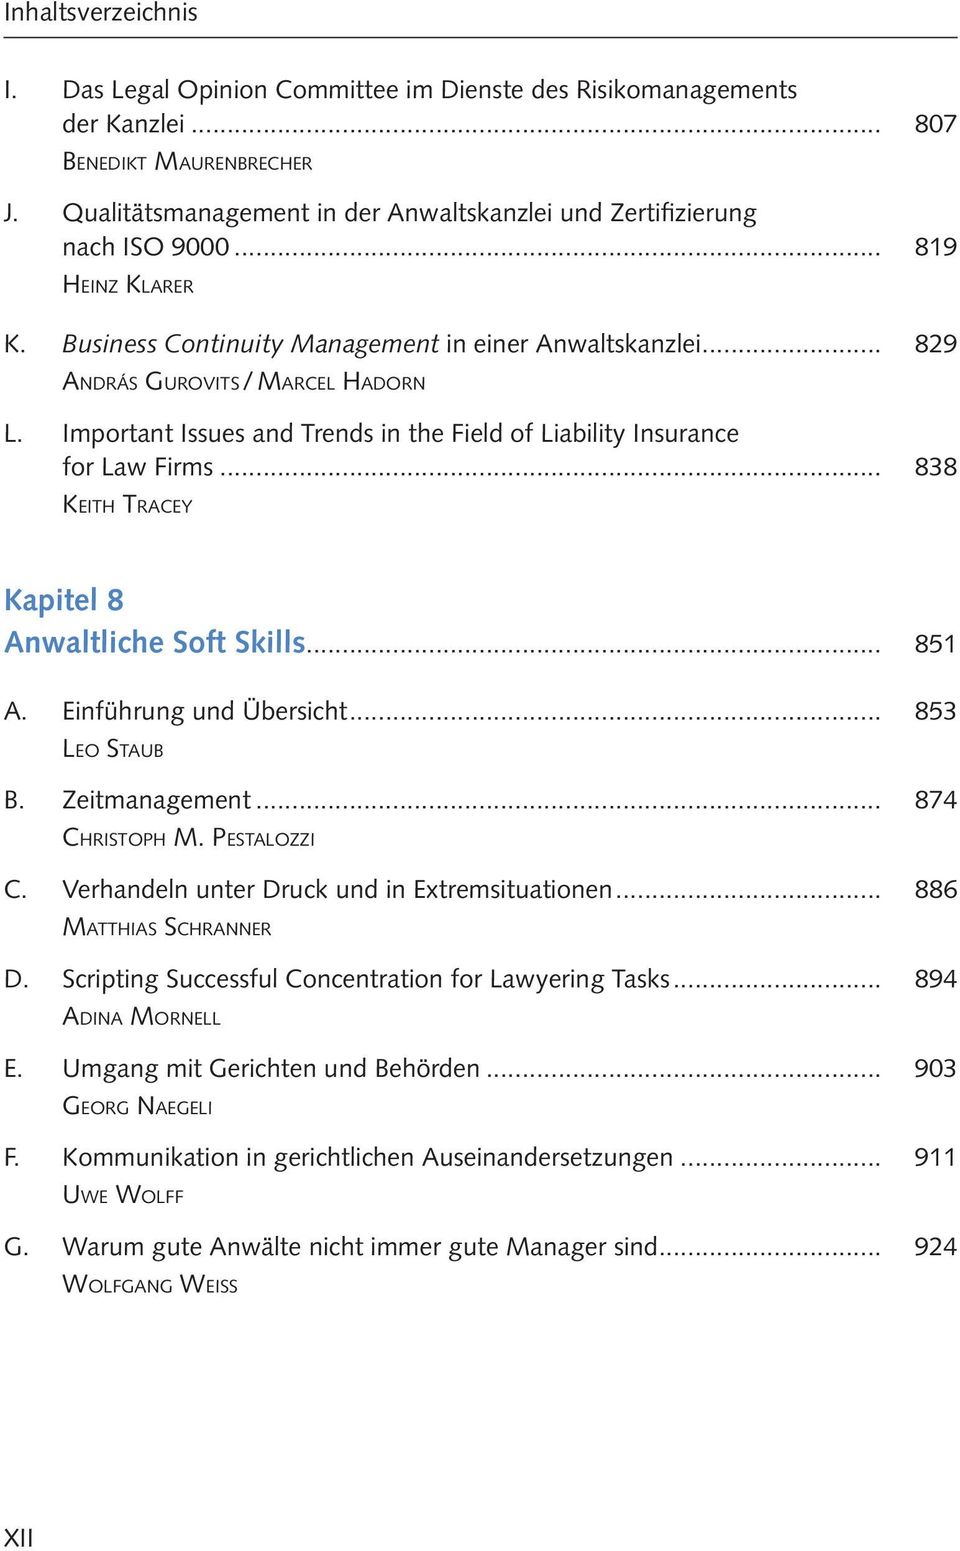 Important Issues and Trends in the Field of Liability Insurance for Law Firms... 838 Keith Tracey Kapitel 8 Anwaltliche Soft Skills... 851 A. Einführung und Übersicht... 853 Leo Staub B.